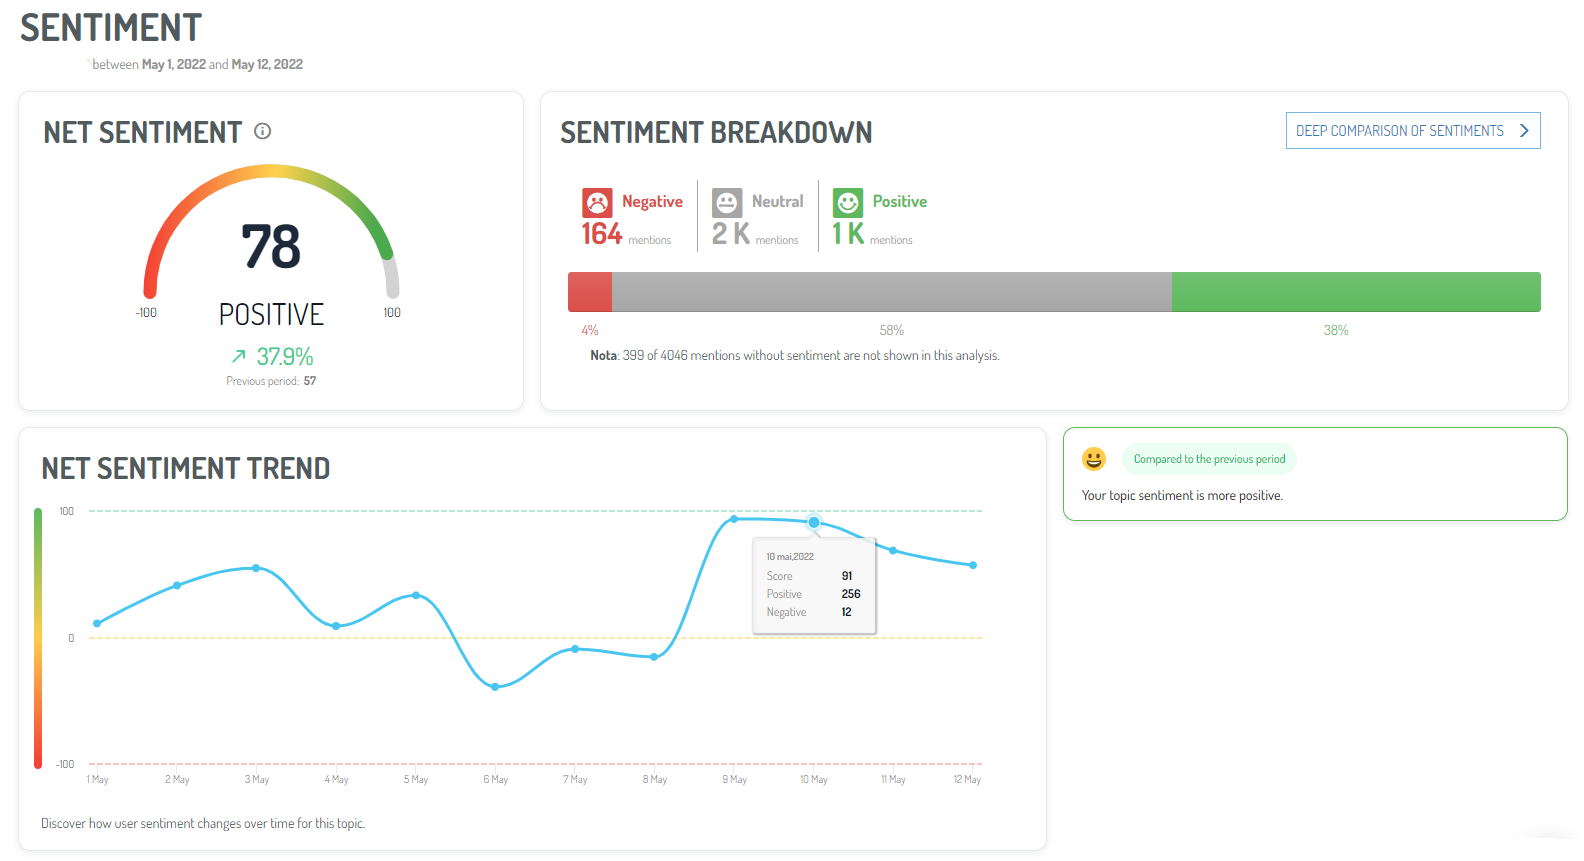 Net sentiment monitoring dashboard. After a bad buzz, the net sentiment of this brand again moved towards positive indicators